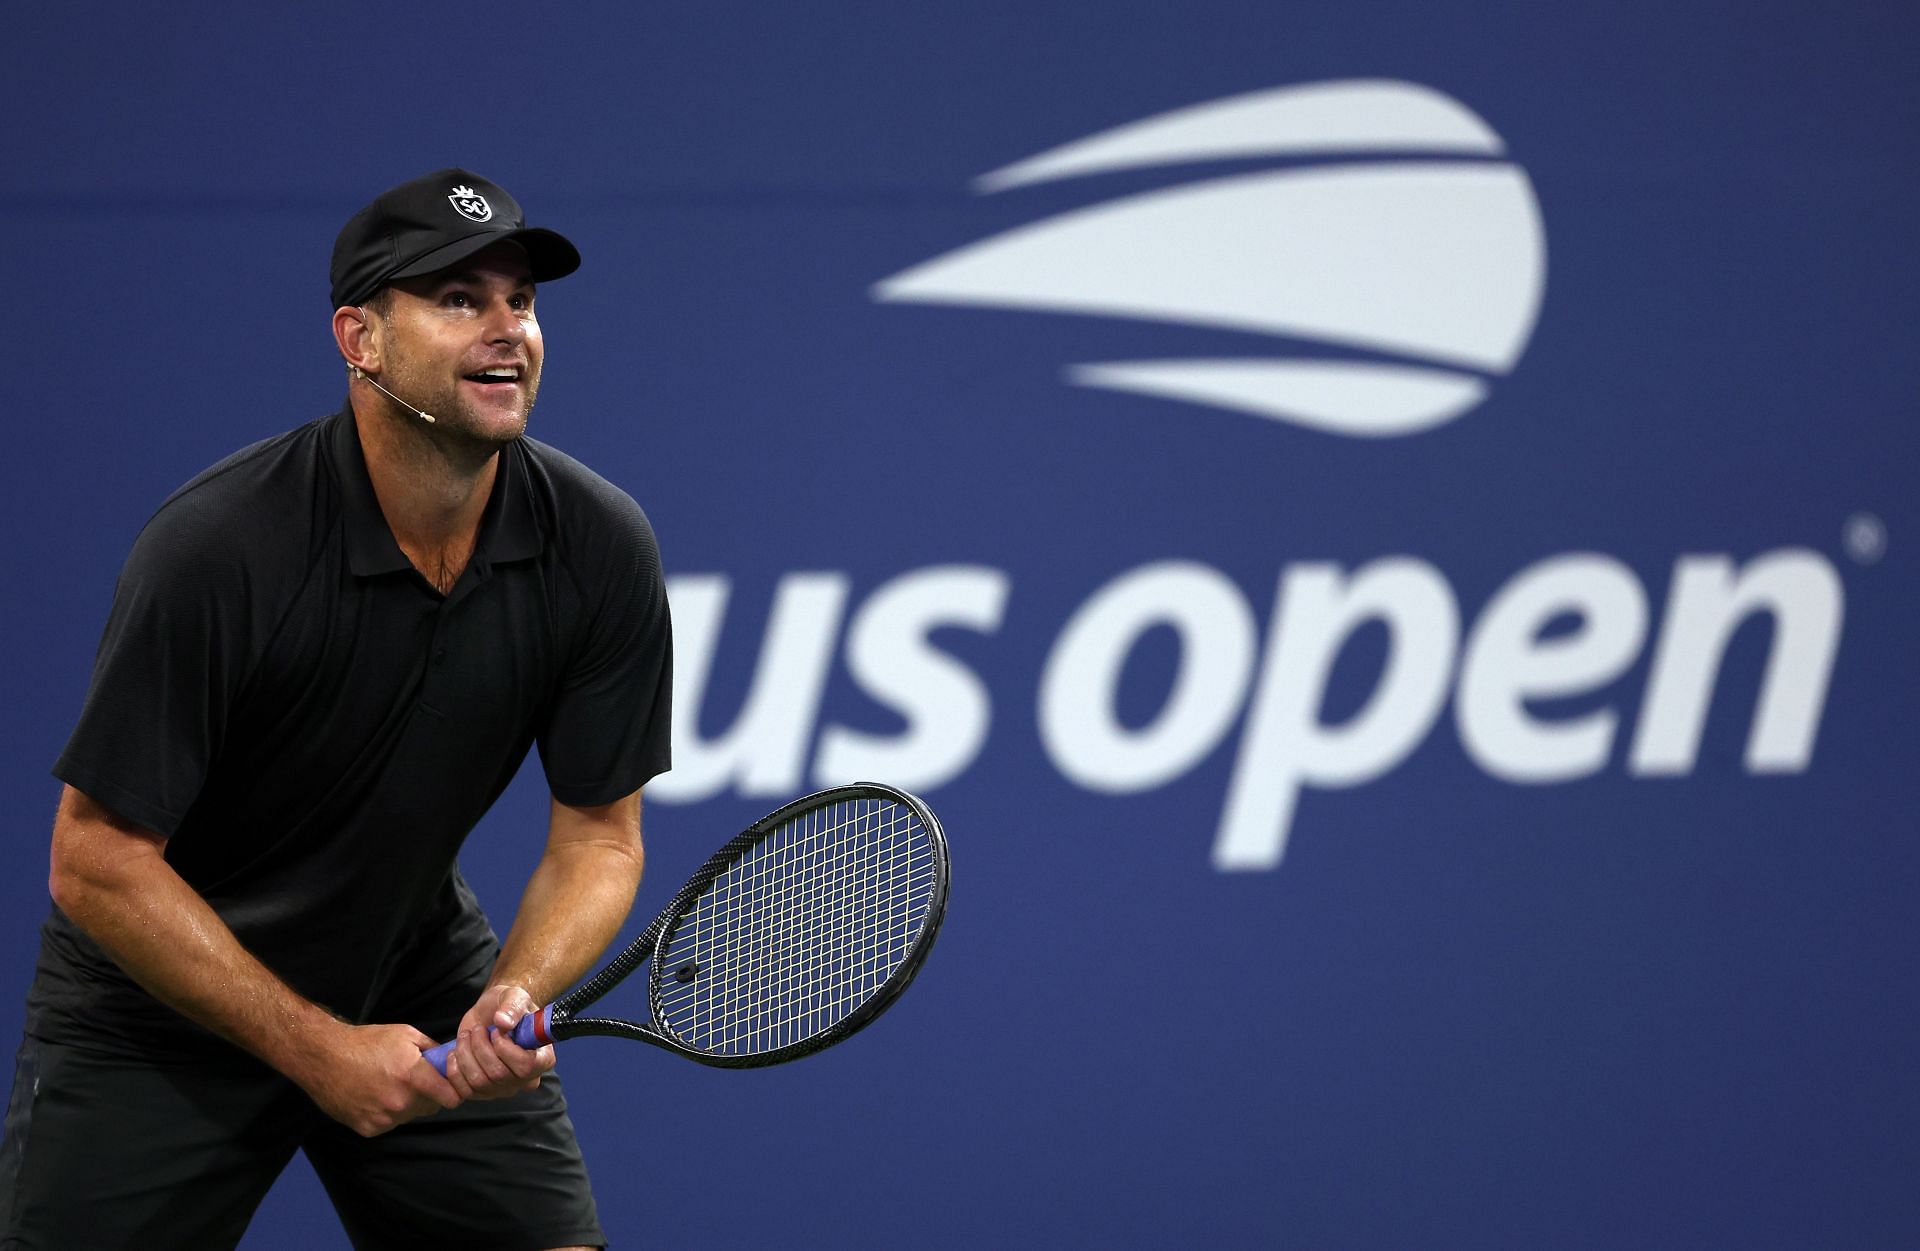 2022 US Open - Previews - Andy Roddick